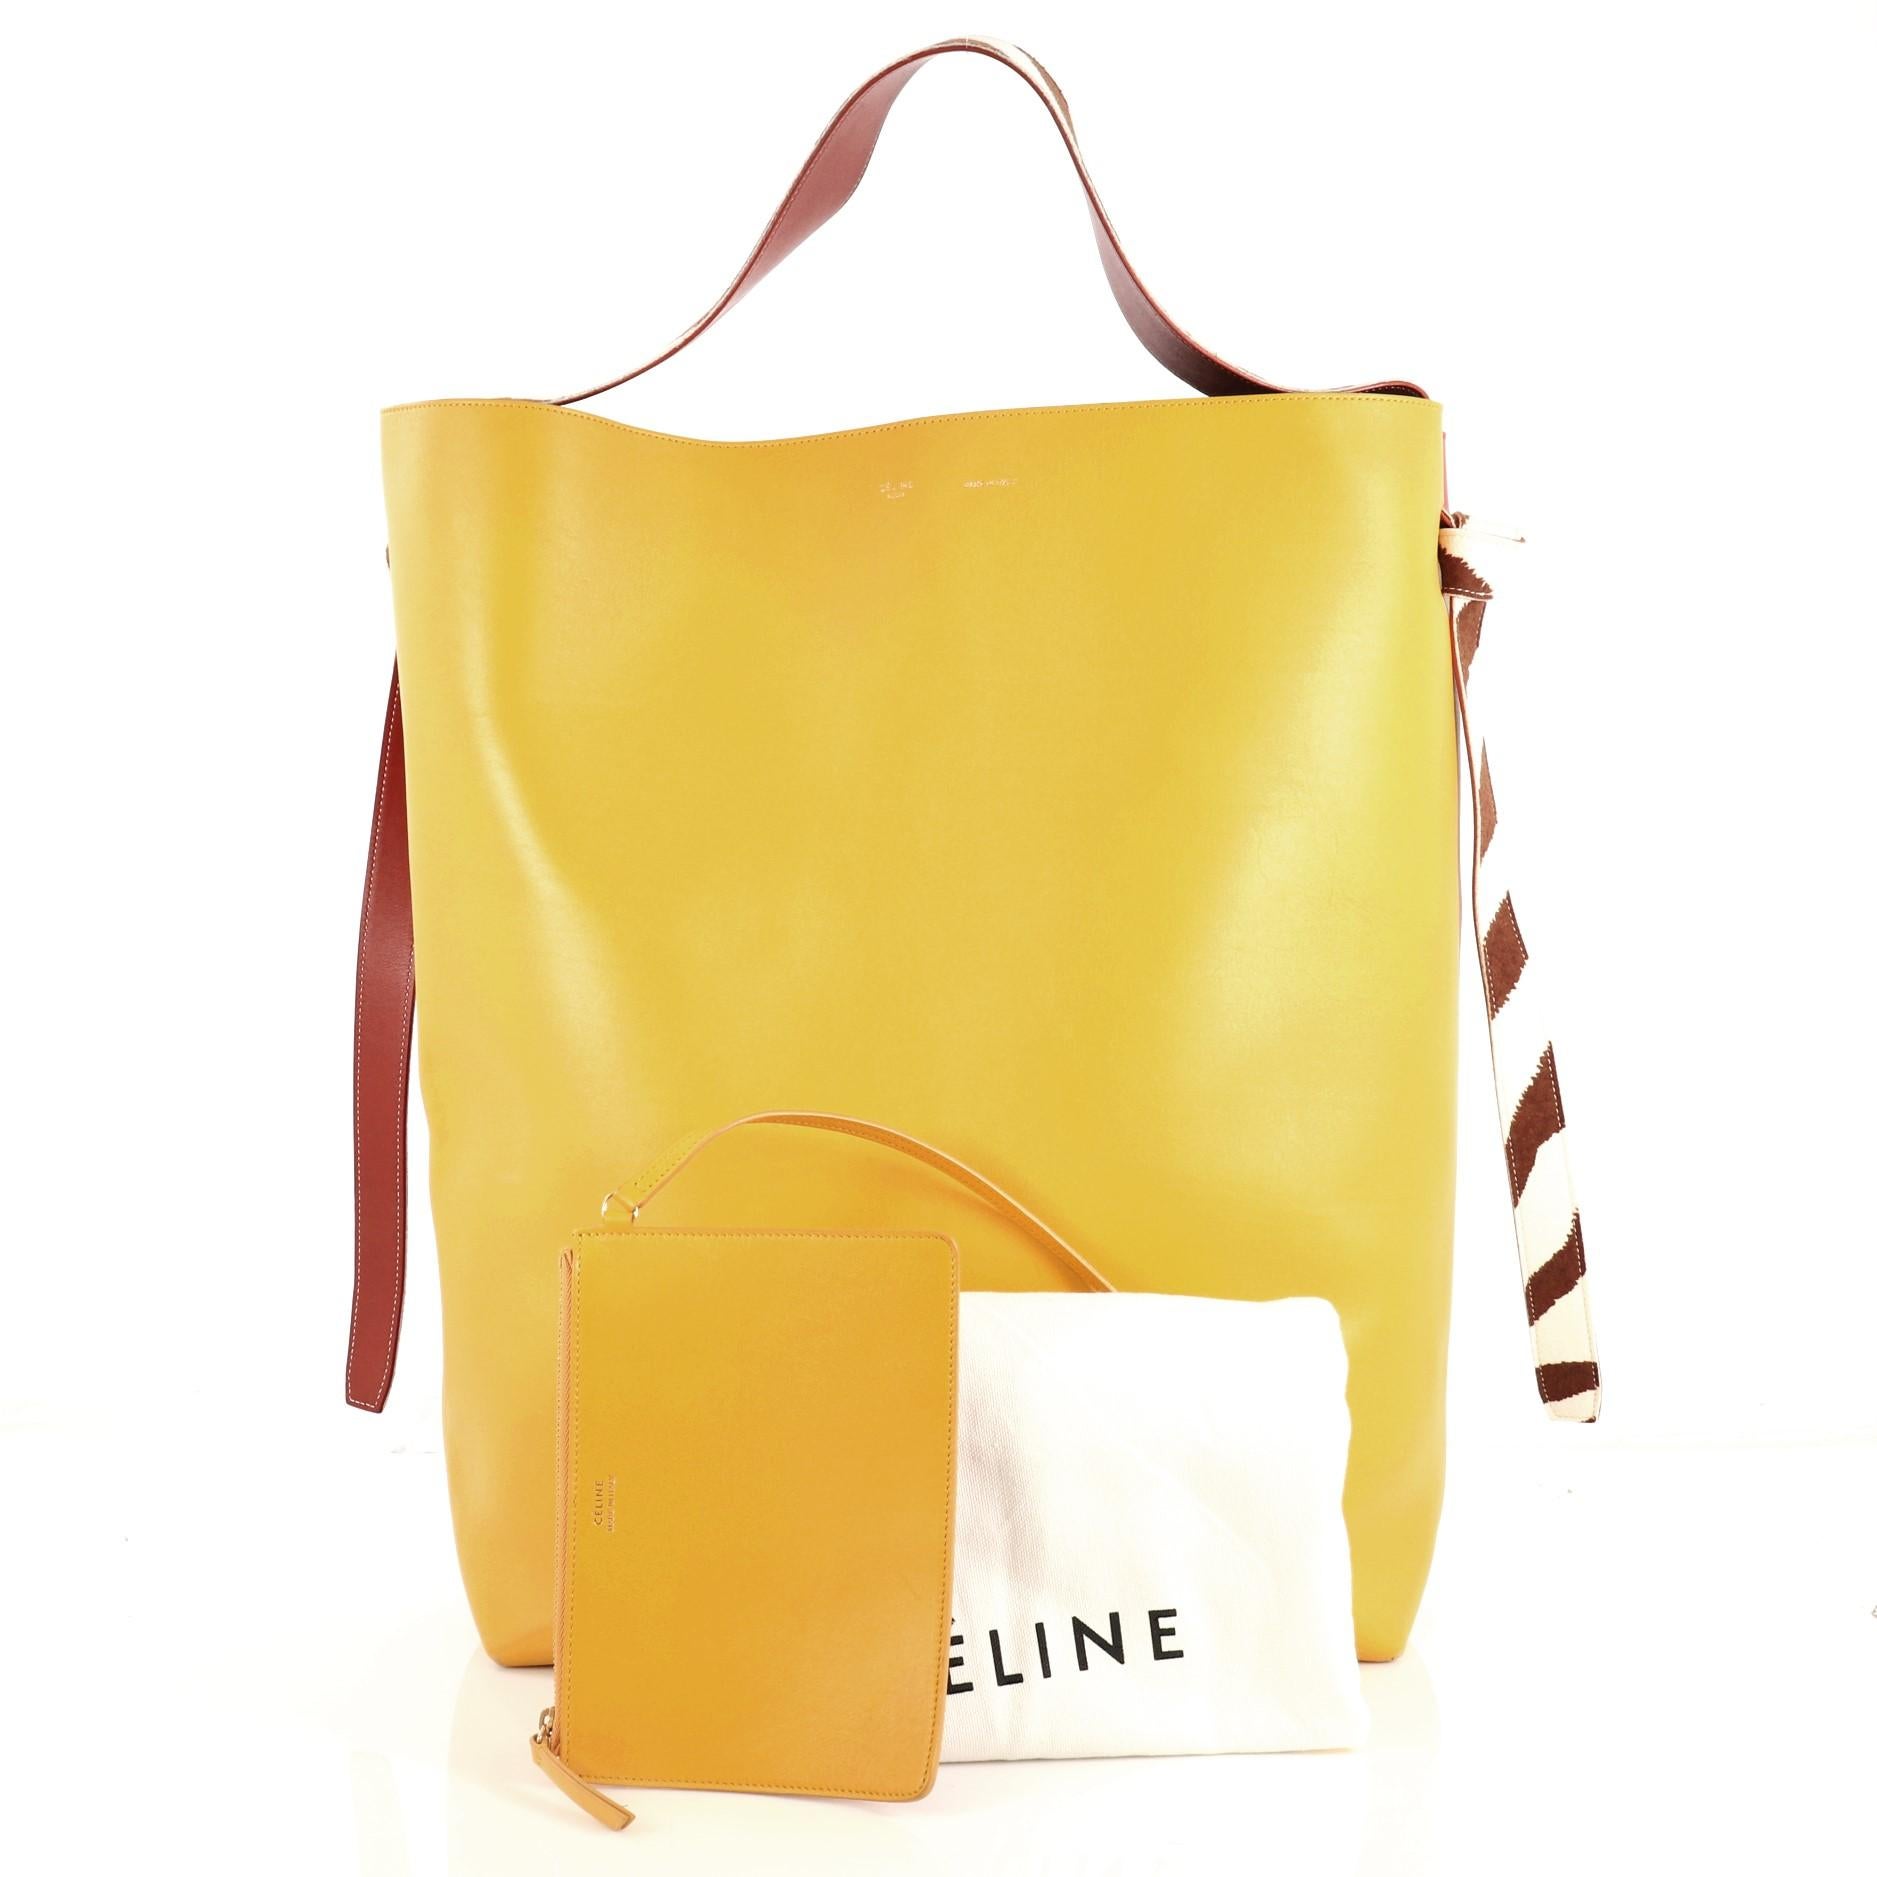 This Celine Twisted Cabas Tote Leather with Felt Oversized, crafted from red and yellow leather with zebra print felt, features looping shoulder strap with knot ends and aged gold-tone hardware. Its wide open top showcases a blue felt interior.